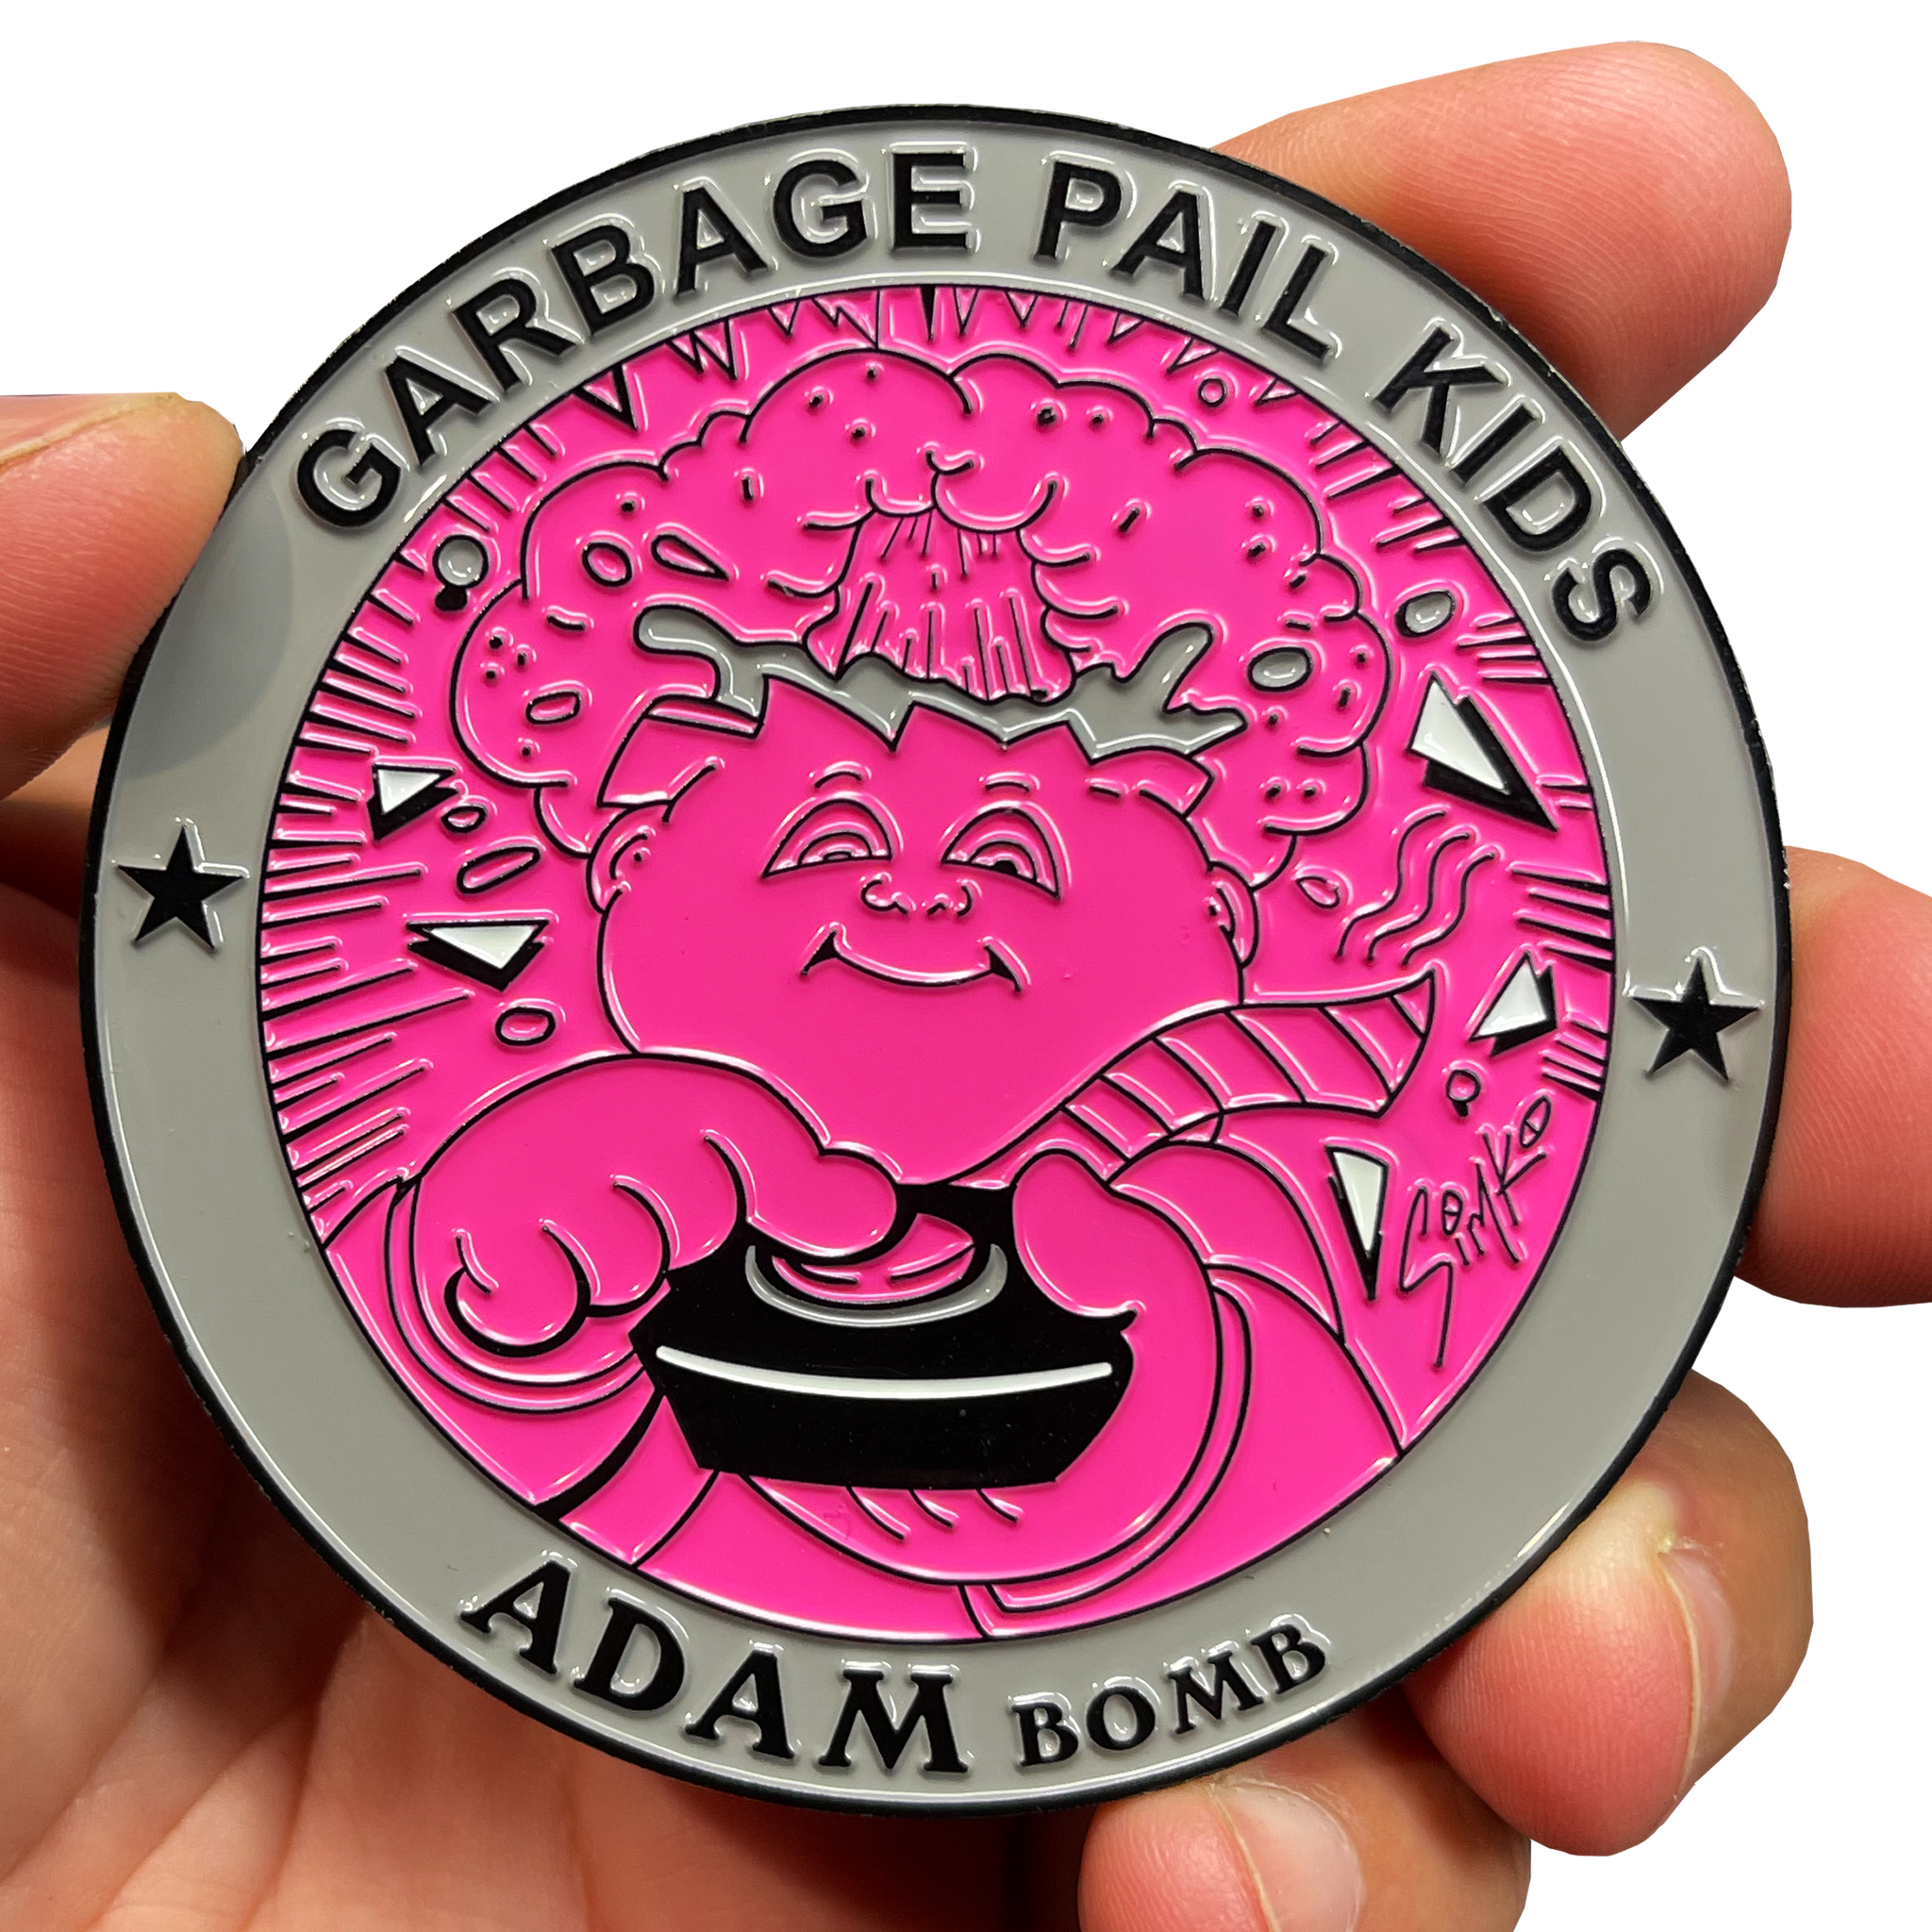 GPK-DD-007 Pink and Gray Variation 3 inch SIMKO Topps Officially Licensed Adam Bomb GPK Challenge Coin Garbage Pail Kids